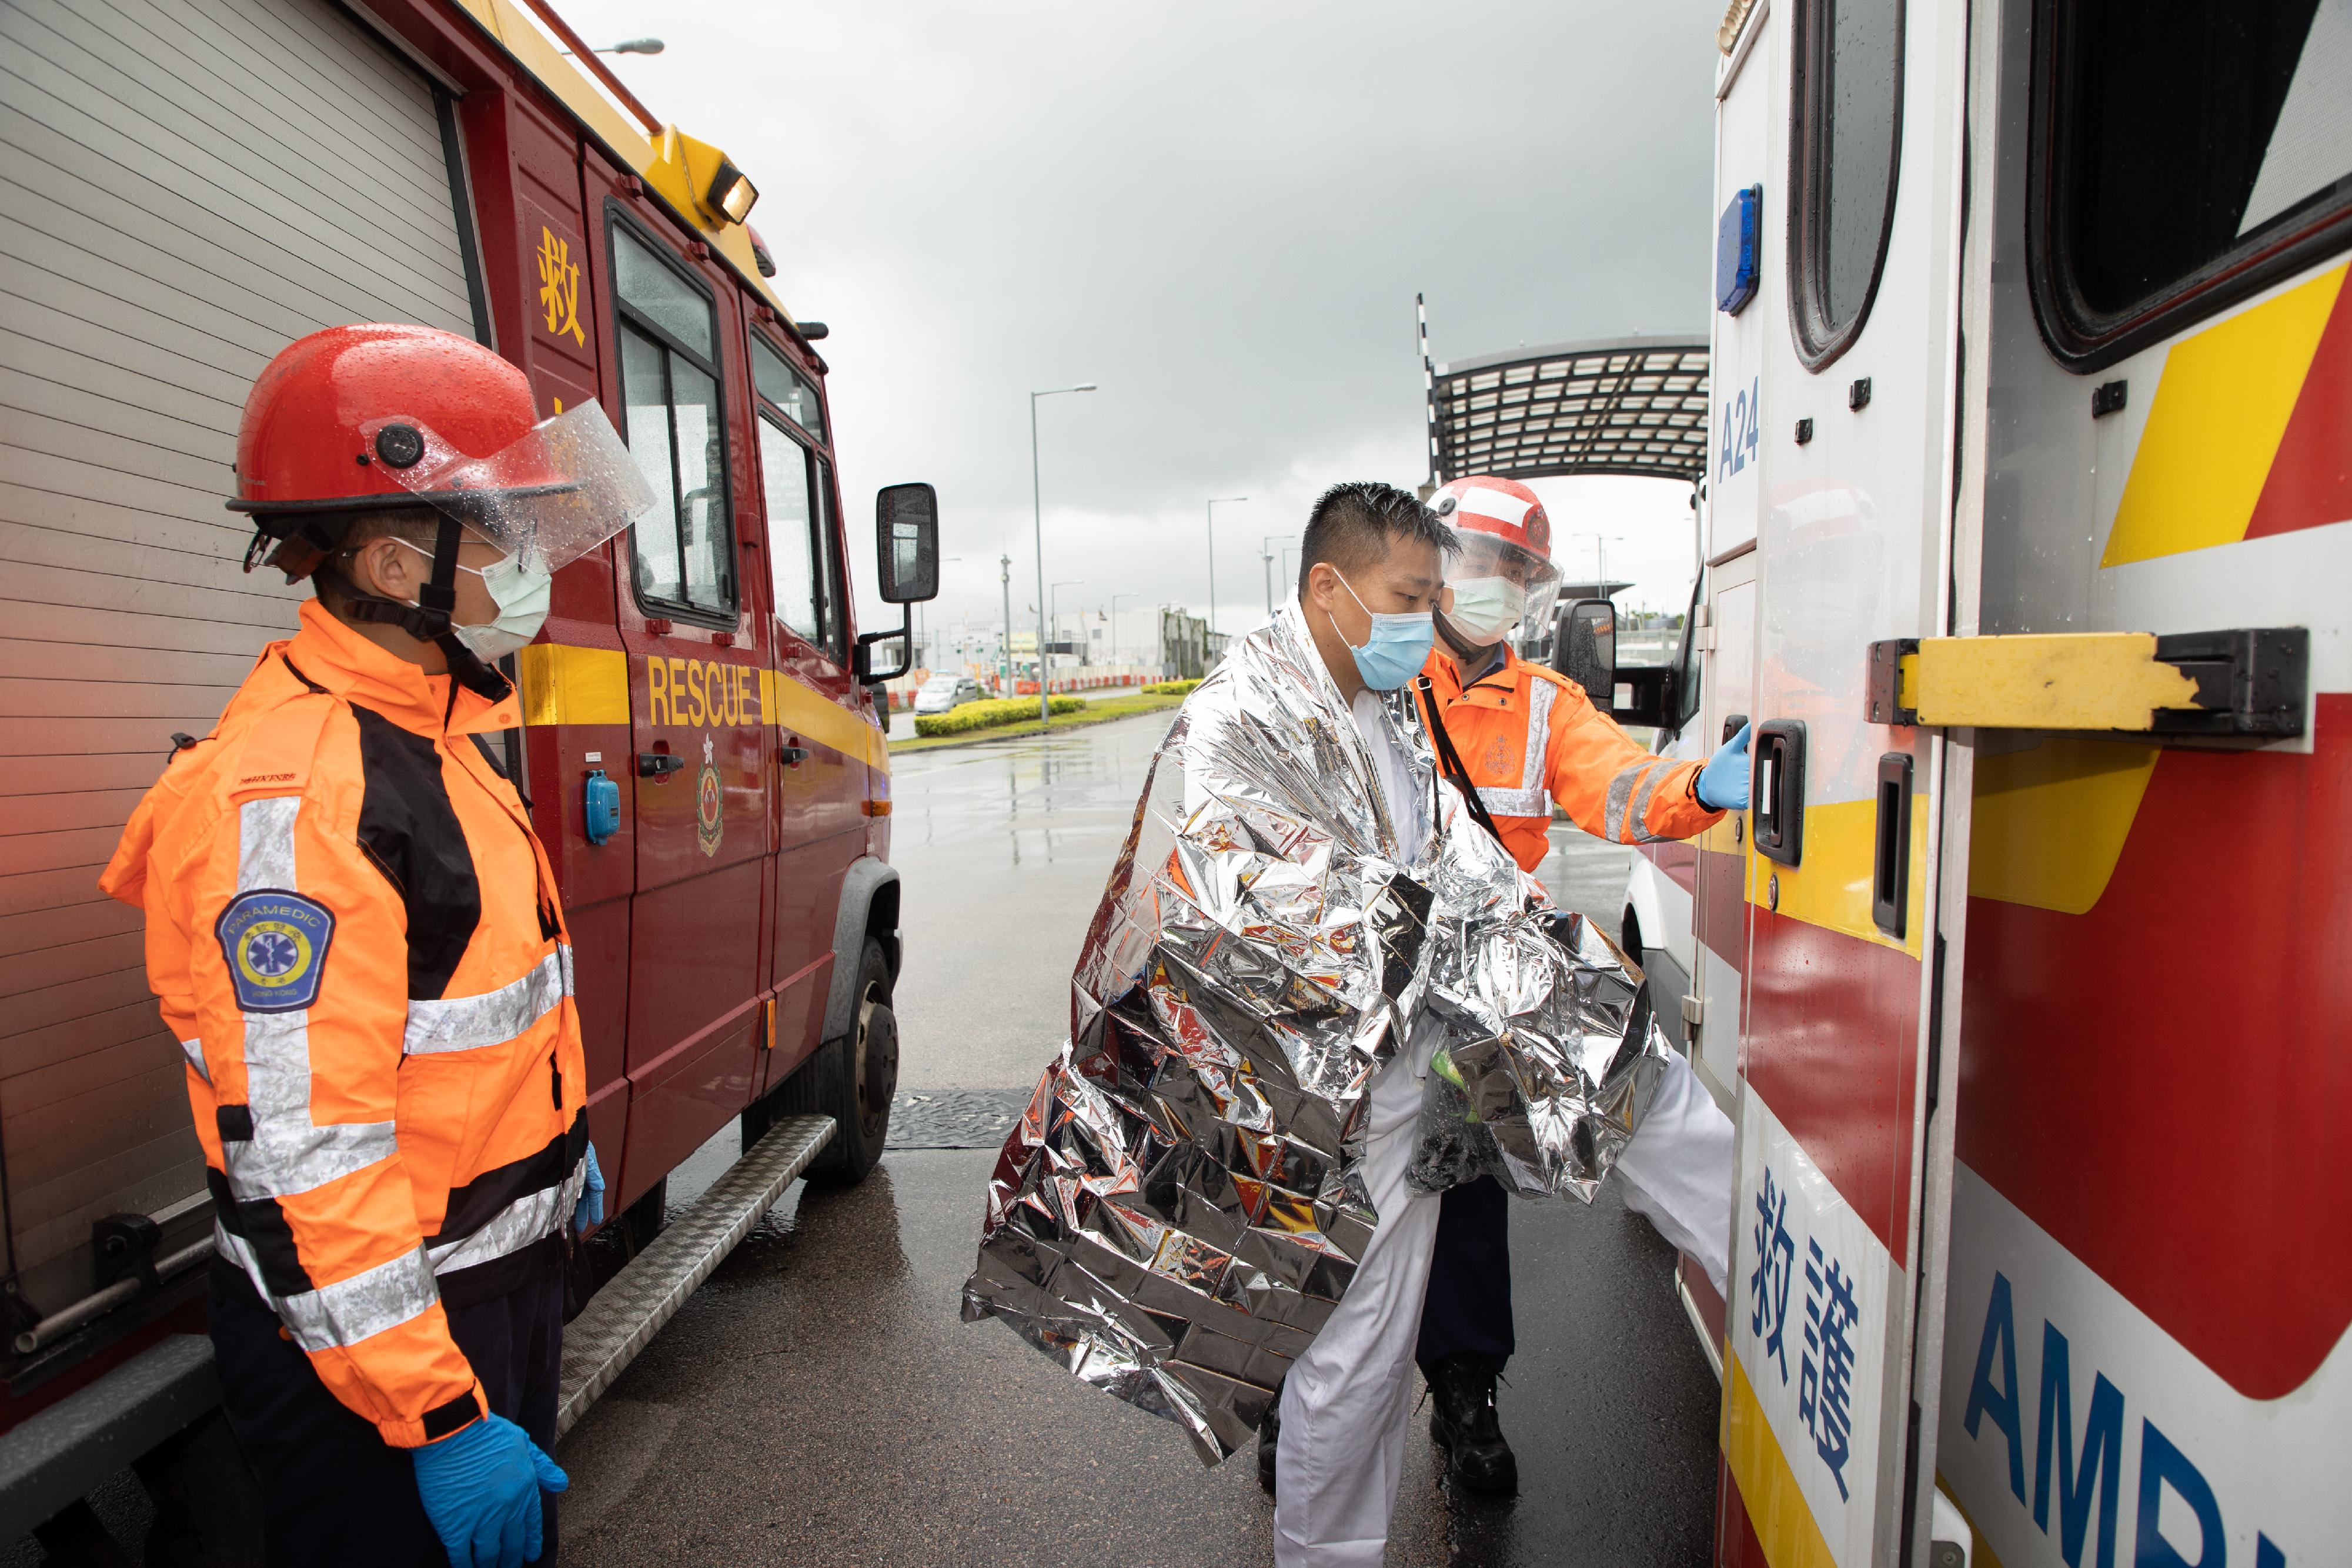 The Fire Services Department and the Hong Kong Police Force jointly held a counter-terrorism and hazardous material incident exercise code-named "DEFENCE" this morning (May 31) at the cross-boundary coach parking bay outside the Passenger Clearance Building of the Hong Kong-Zhuhai-Macao Bridge Hong Kong Port. Photo shows ambulance personnel conveying an injured person to an ambulance in the simulation.